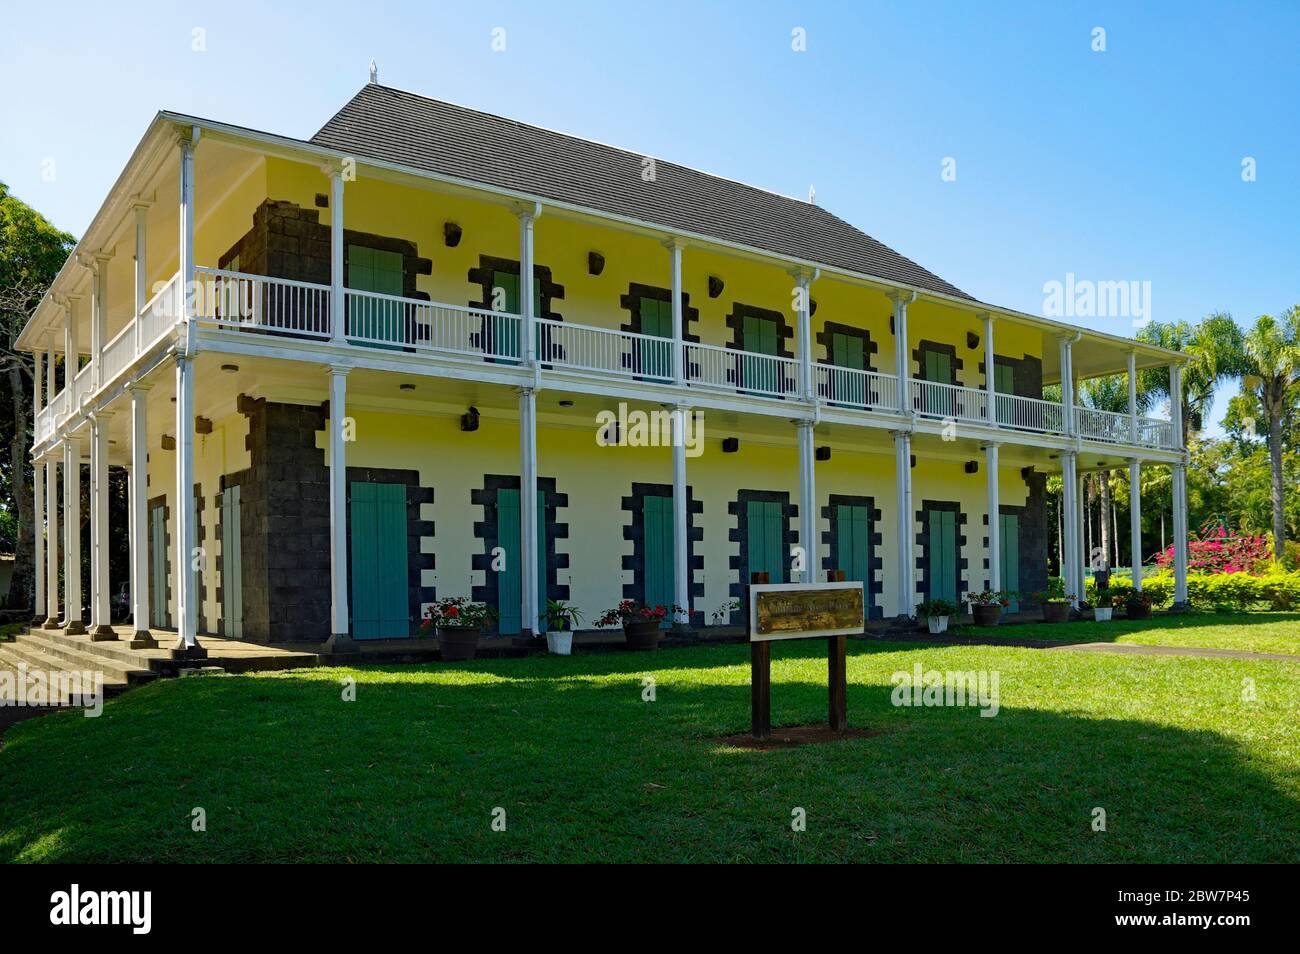 PORT LOUIS/ MAURITIUS - AUGUST 14, 2018: Colonial manor house named 'Château Mon Plaisir' in the Sir Seewoosagur Ramgoolam Botanical Garden. This is a Stock Photo